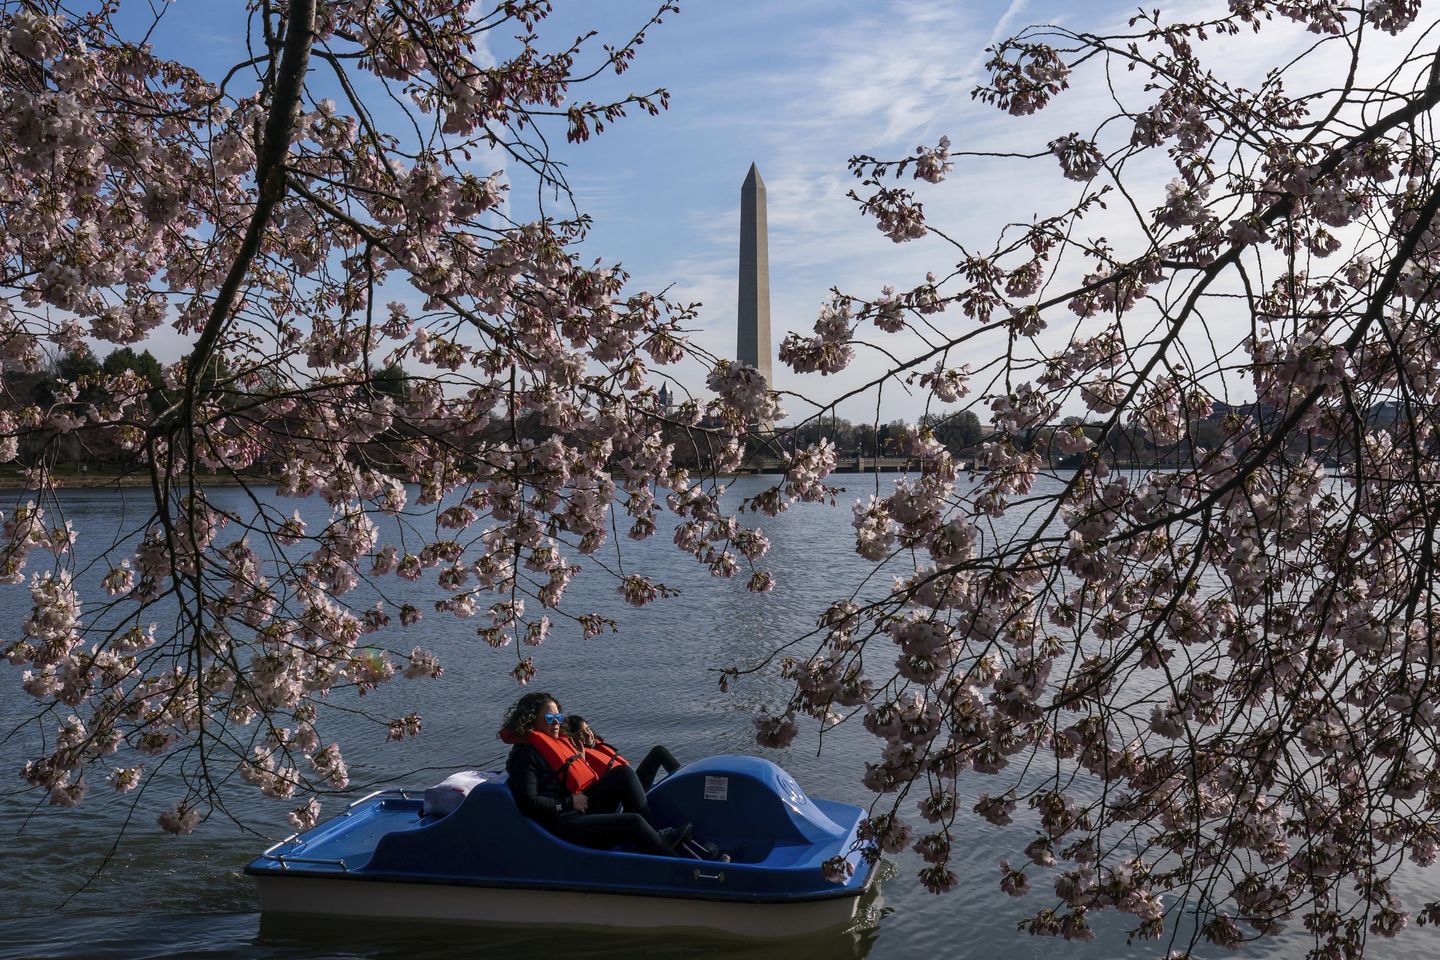 Washington, D.C.'s cherry blossoms have reached the fifth stage of blooming